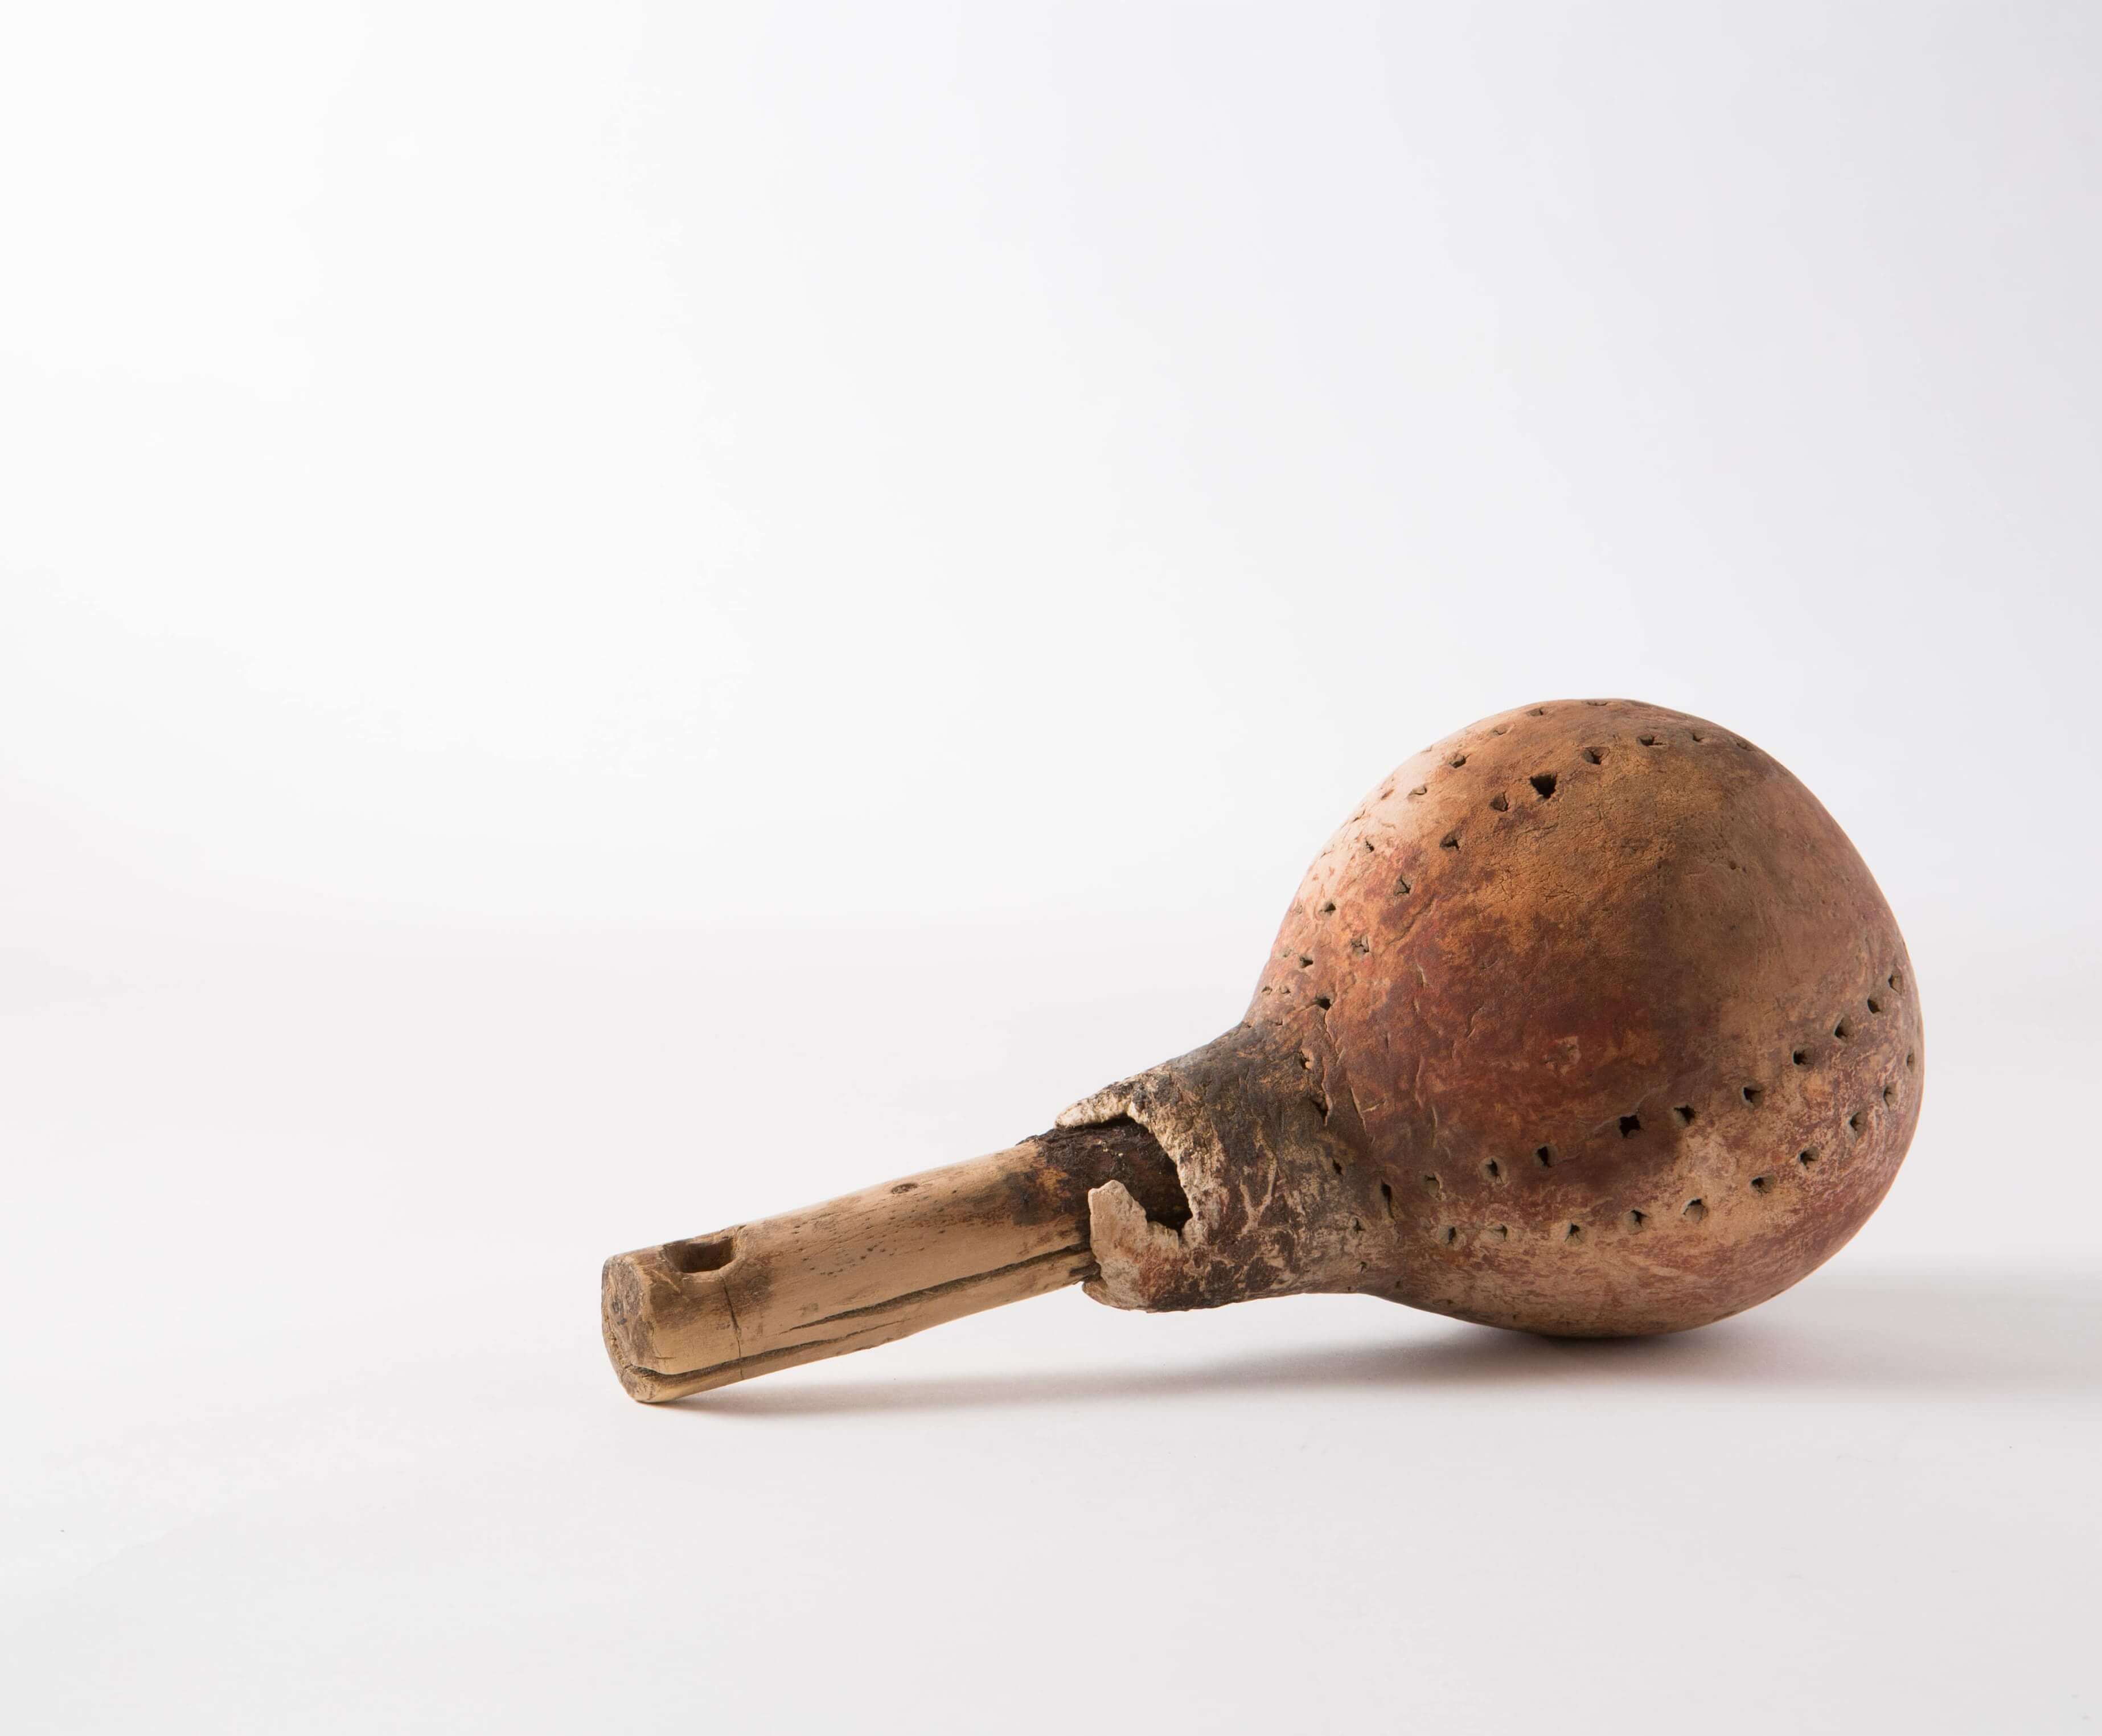 Gourd rattle with wooden handle, found in Palm Canyon.